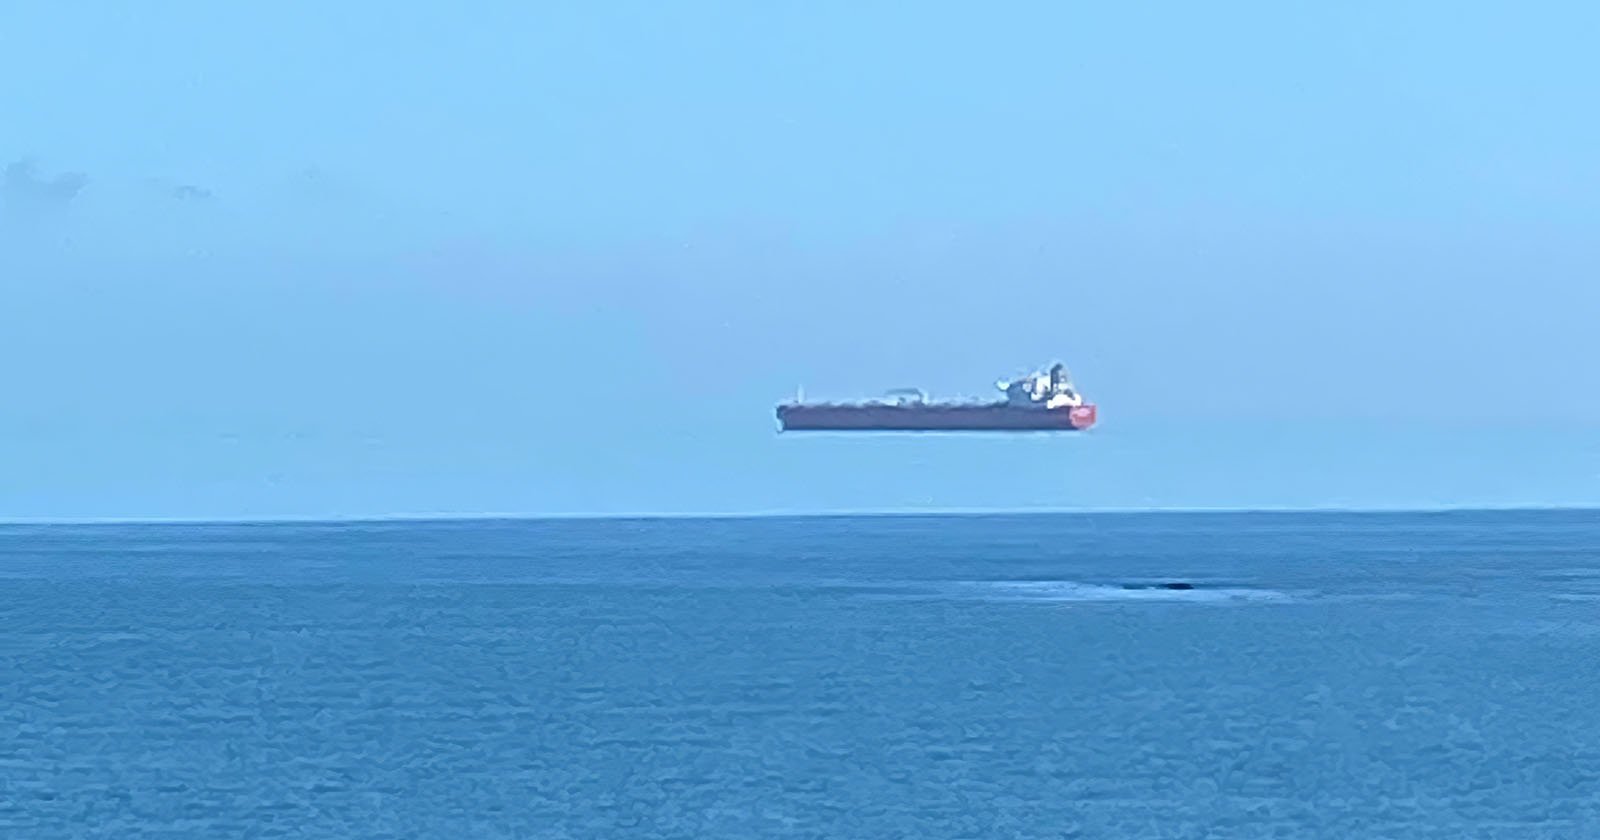 ‘Floating ship’ photographed in the sky off the coast of the United Kingdom